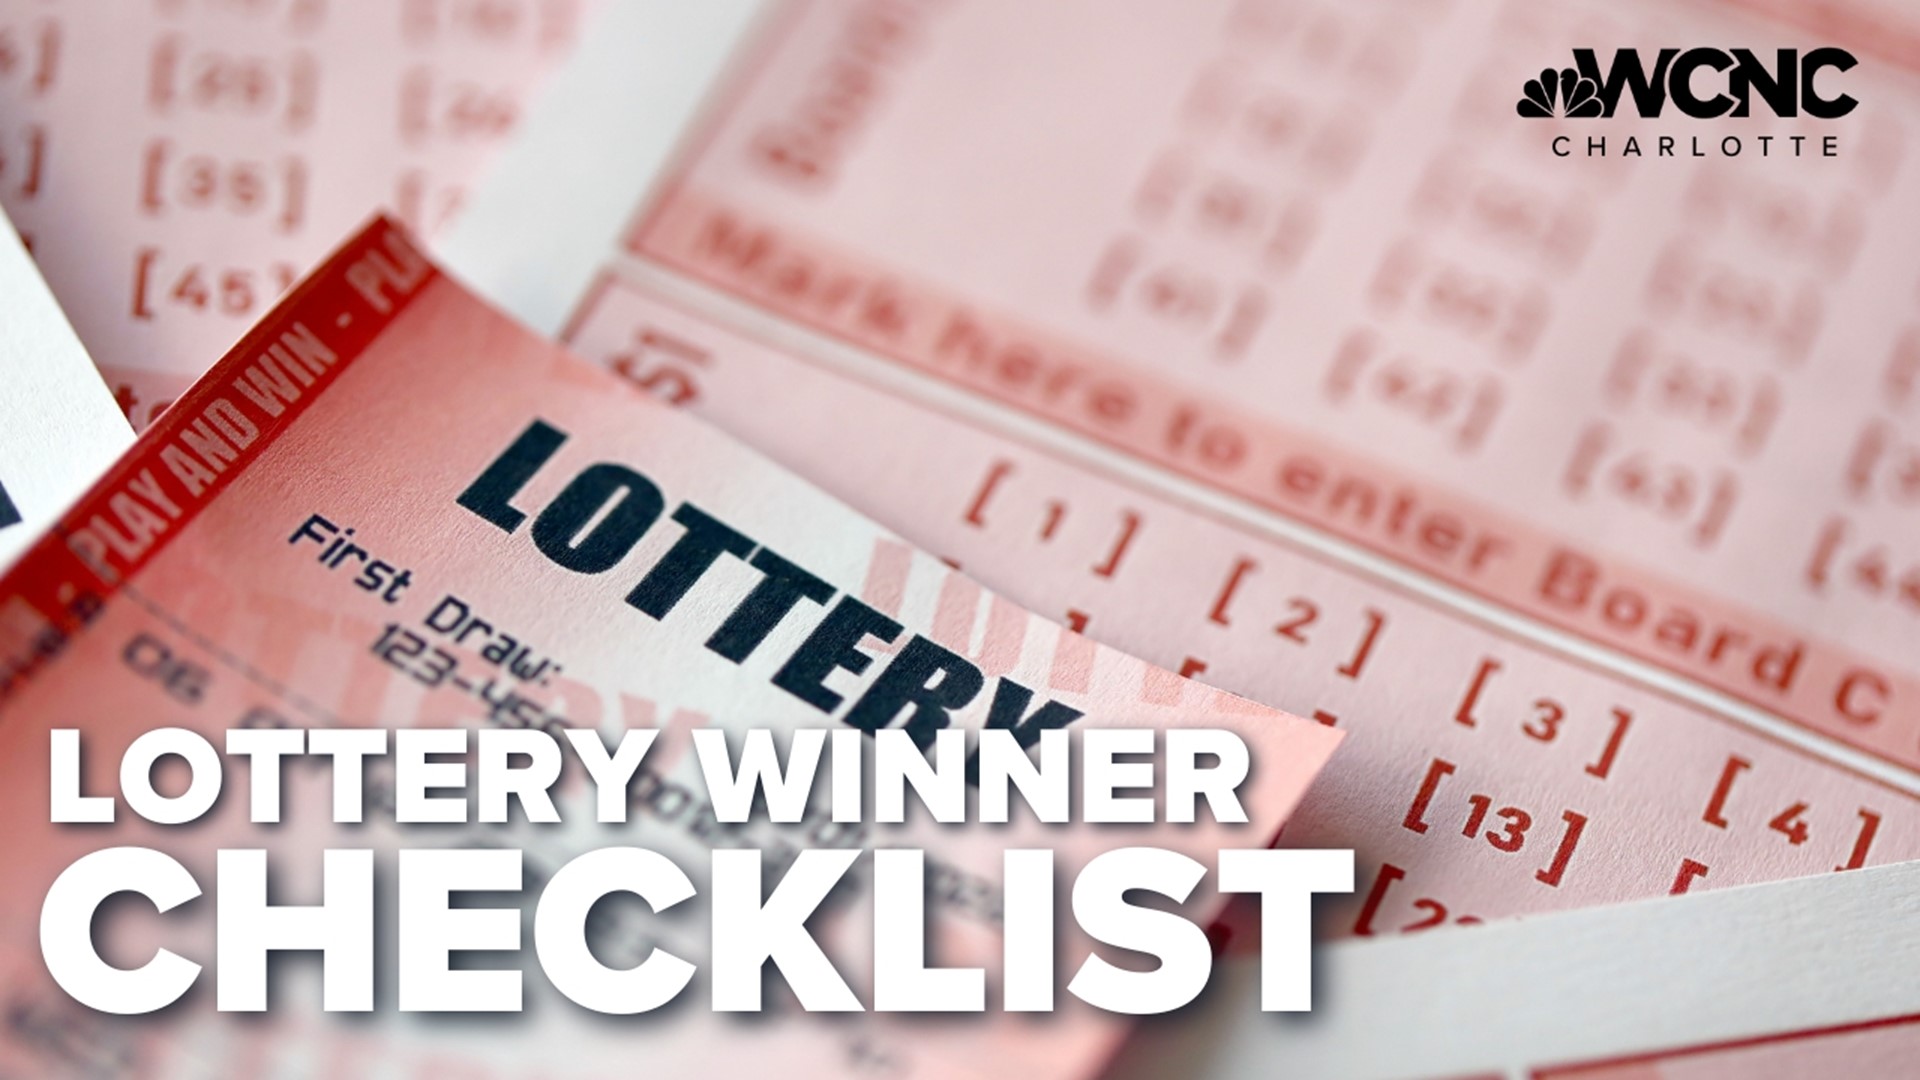 State Farm has advice for you before you turn in that winning lottery ticket.